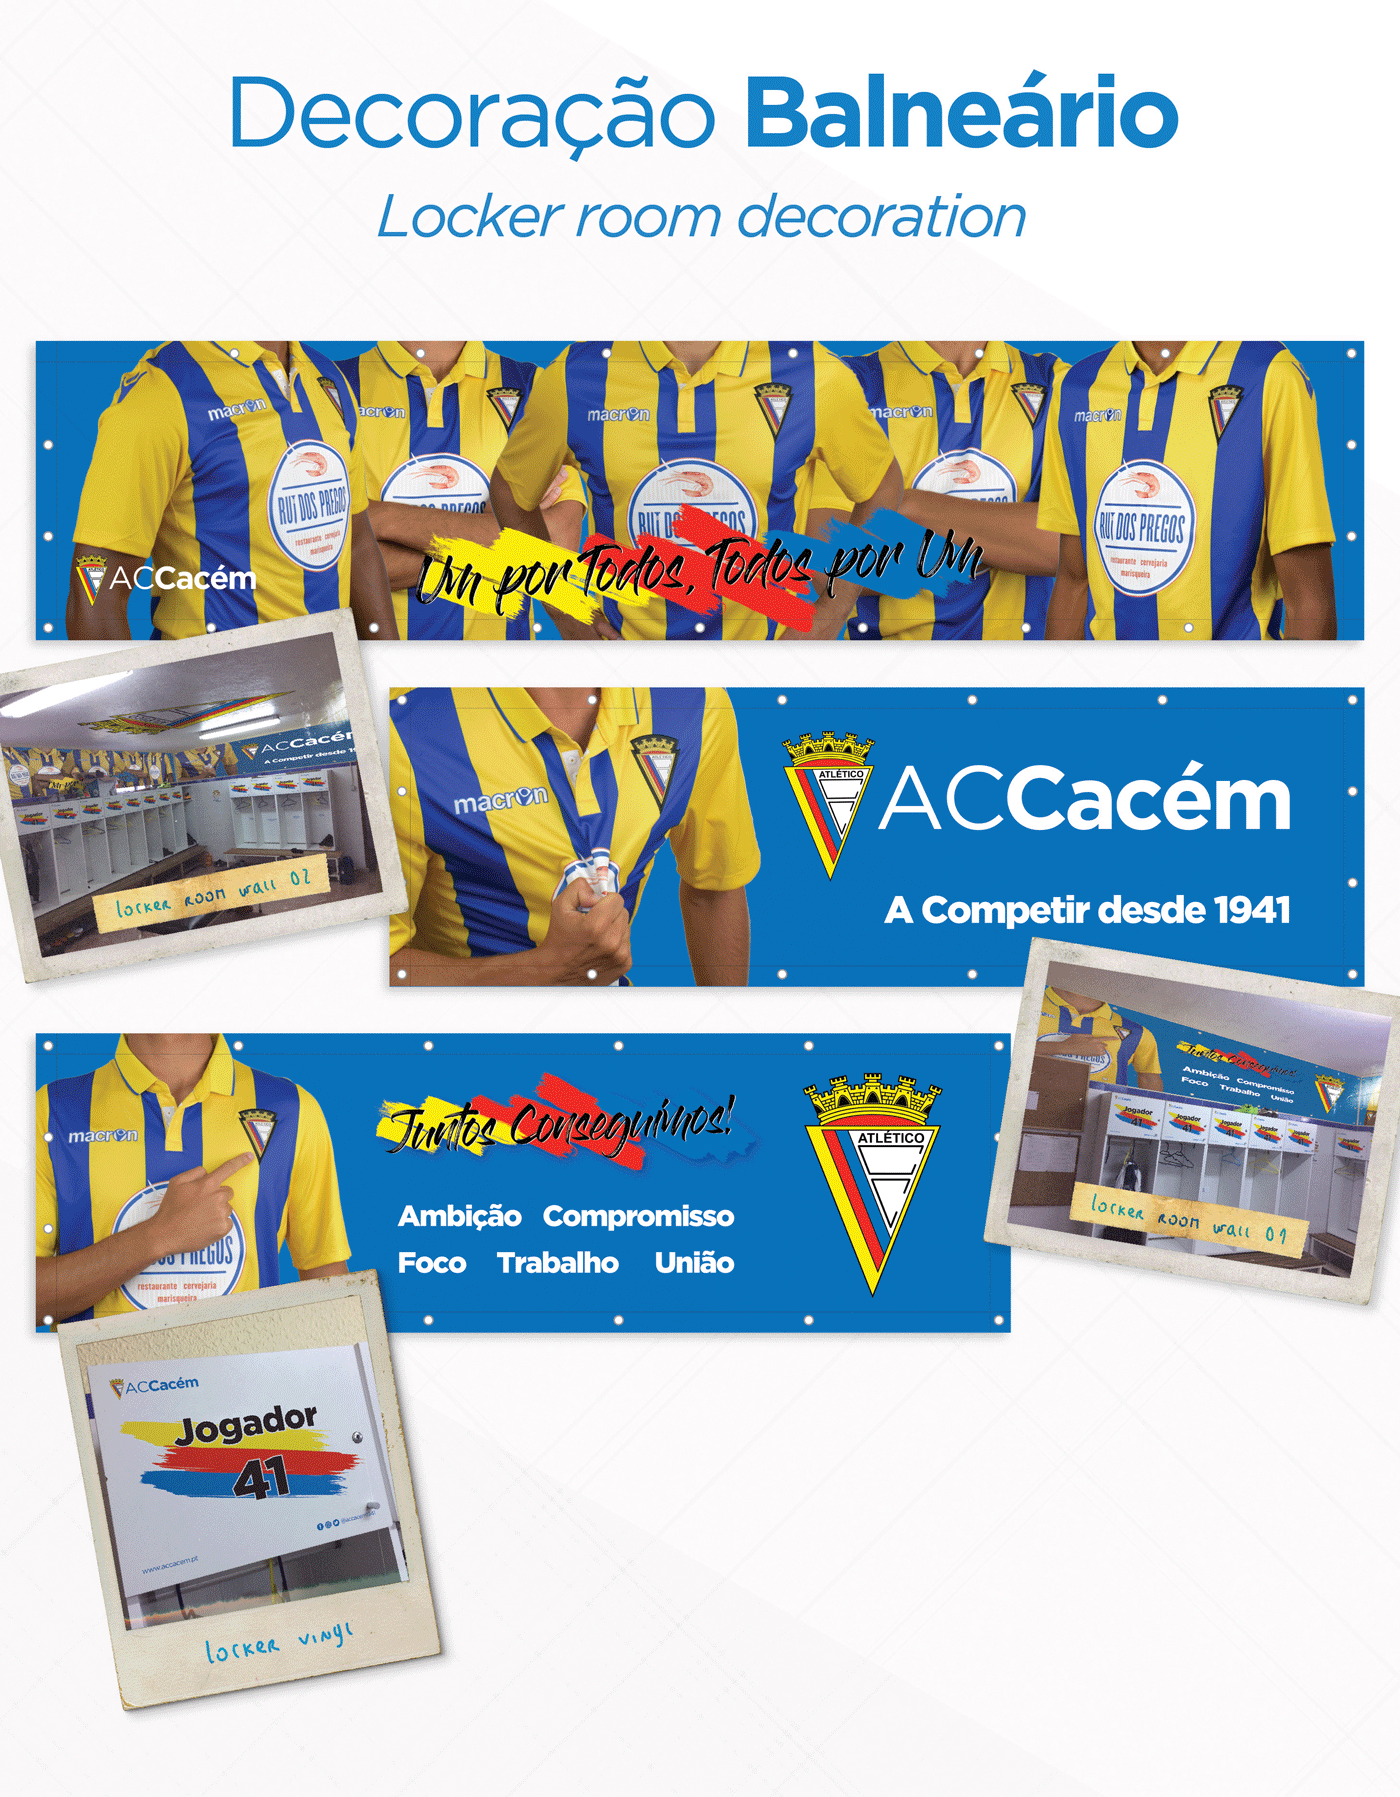 design football communication social media ACCacem graphic sports cacem football club